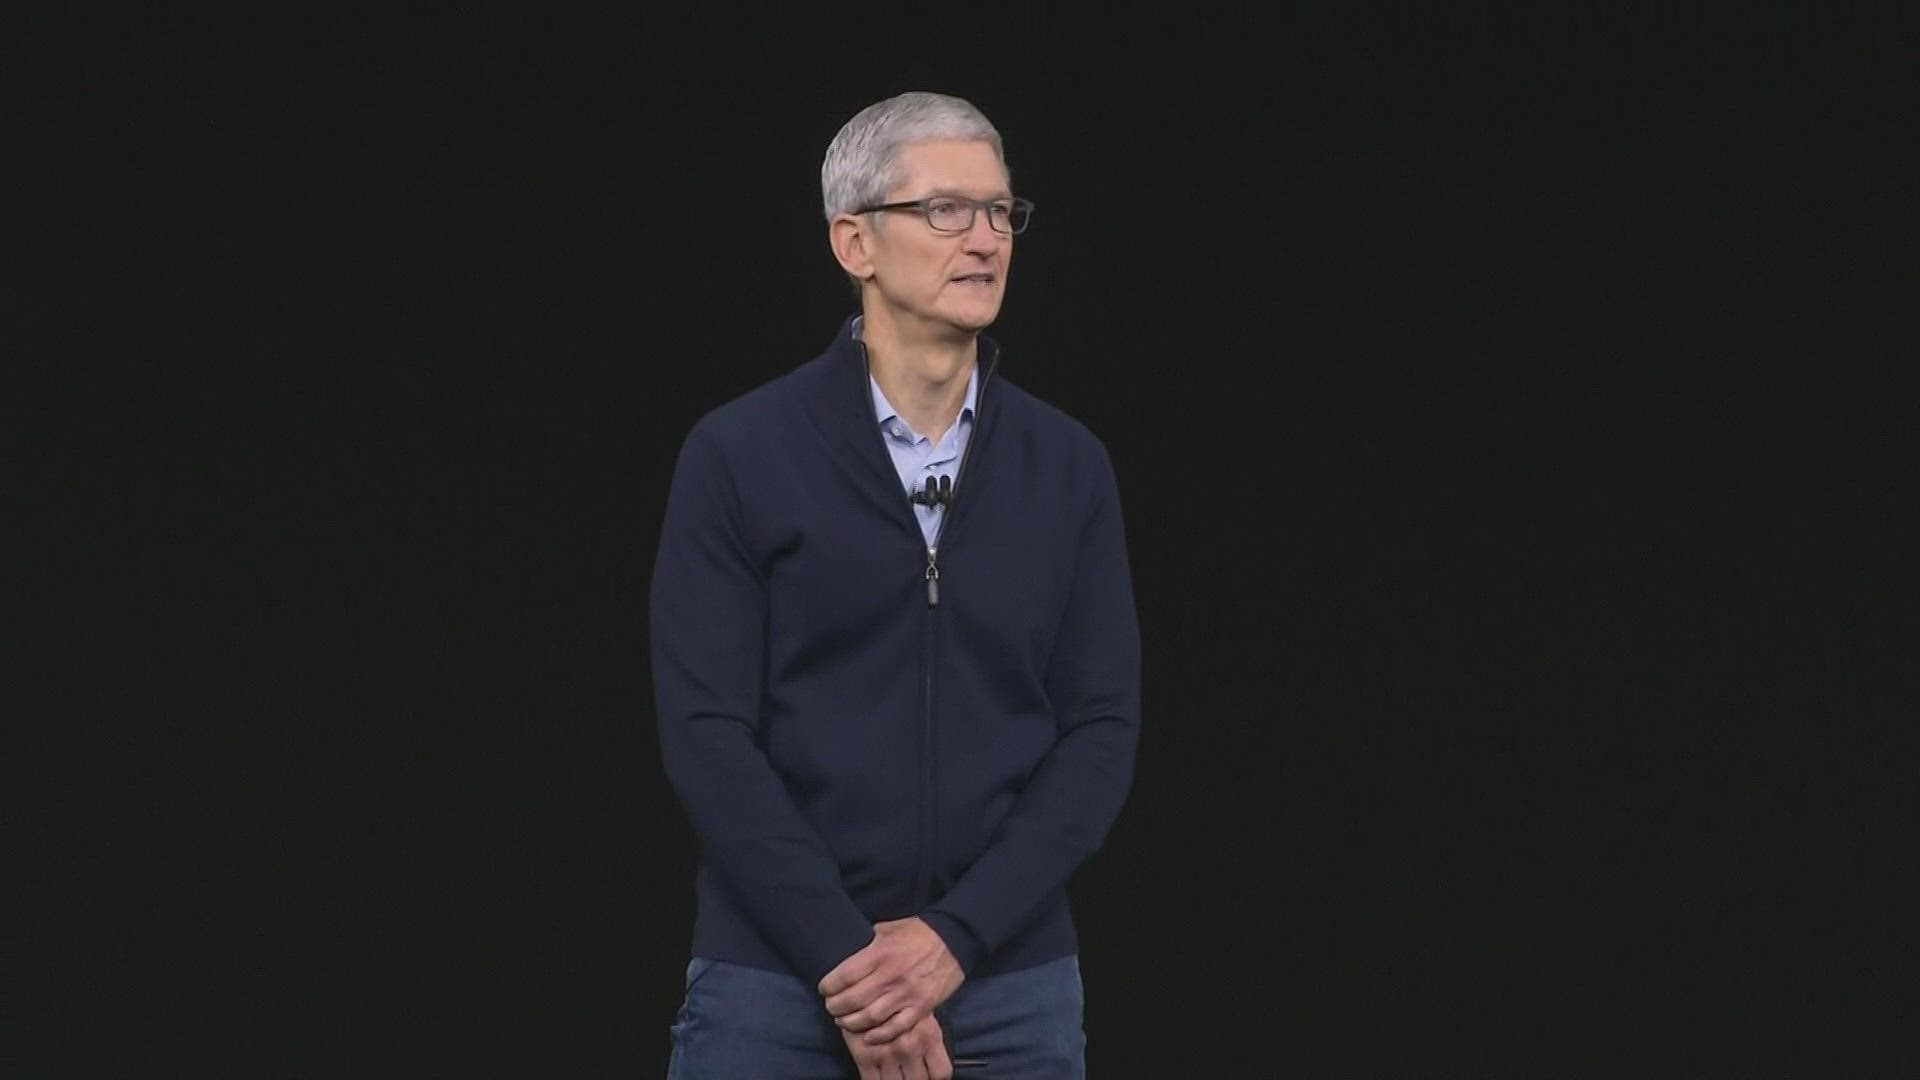 Cook has received a $3 million base salary for the past three years, but his total compensation for leading Apple was $99.4 million in 2022.